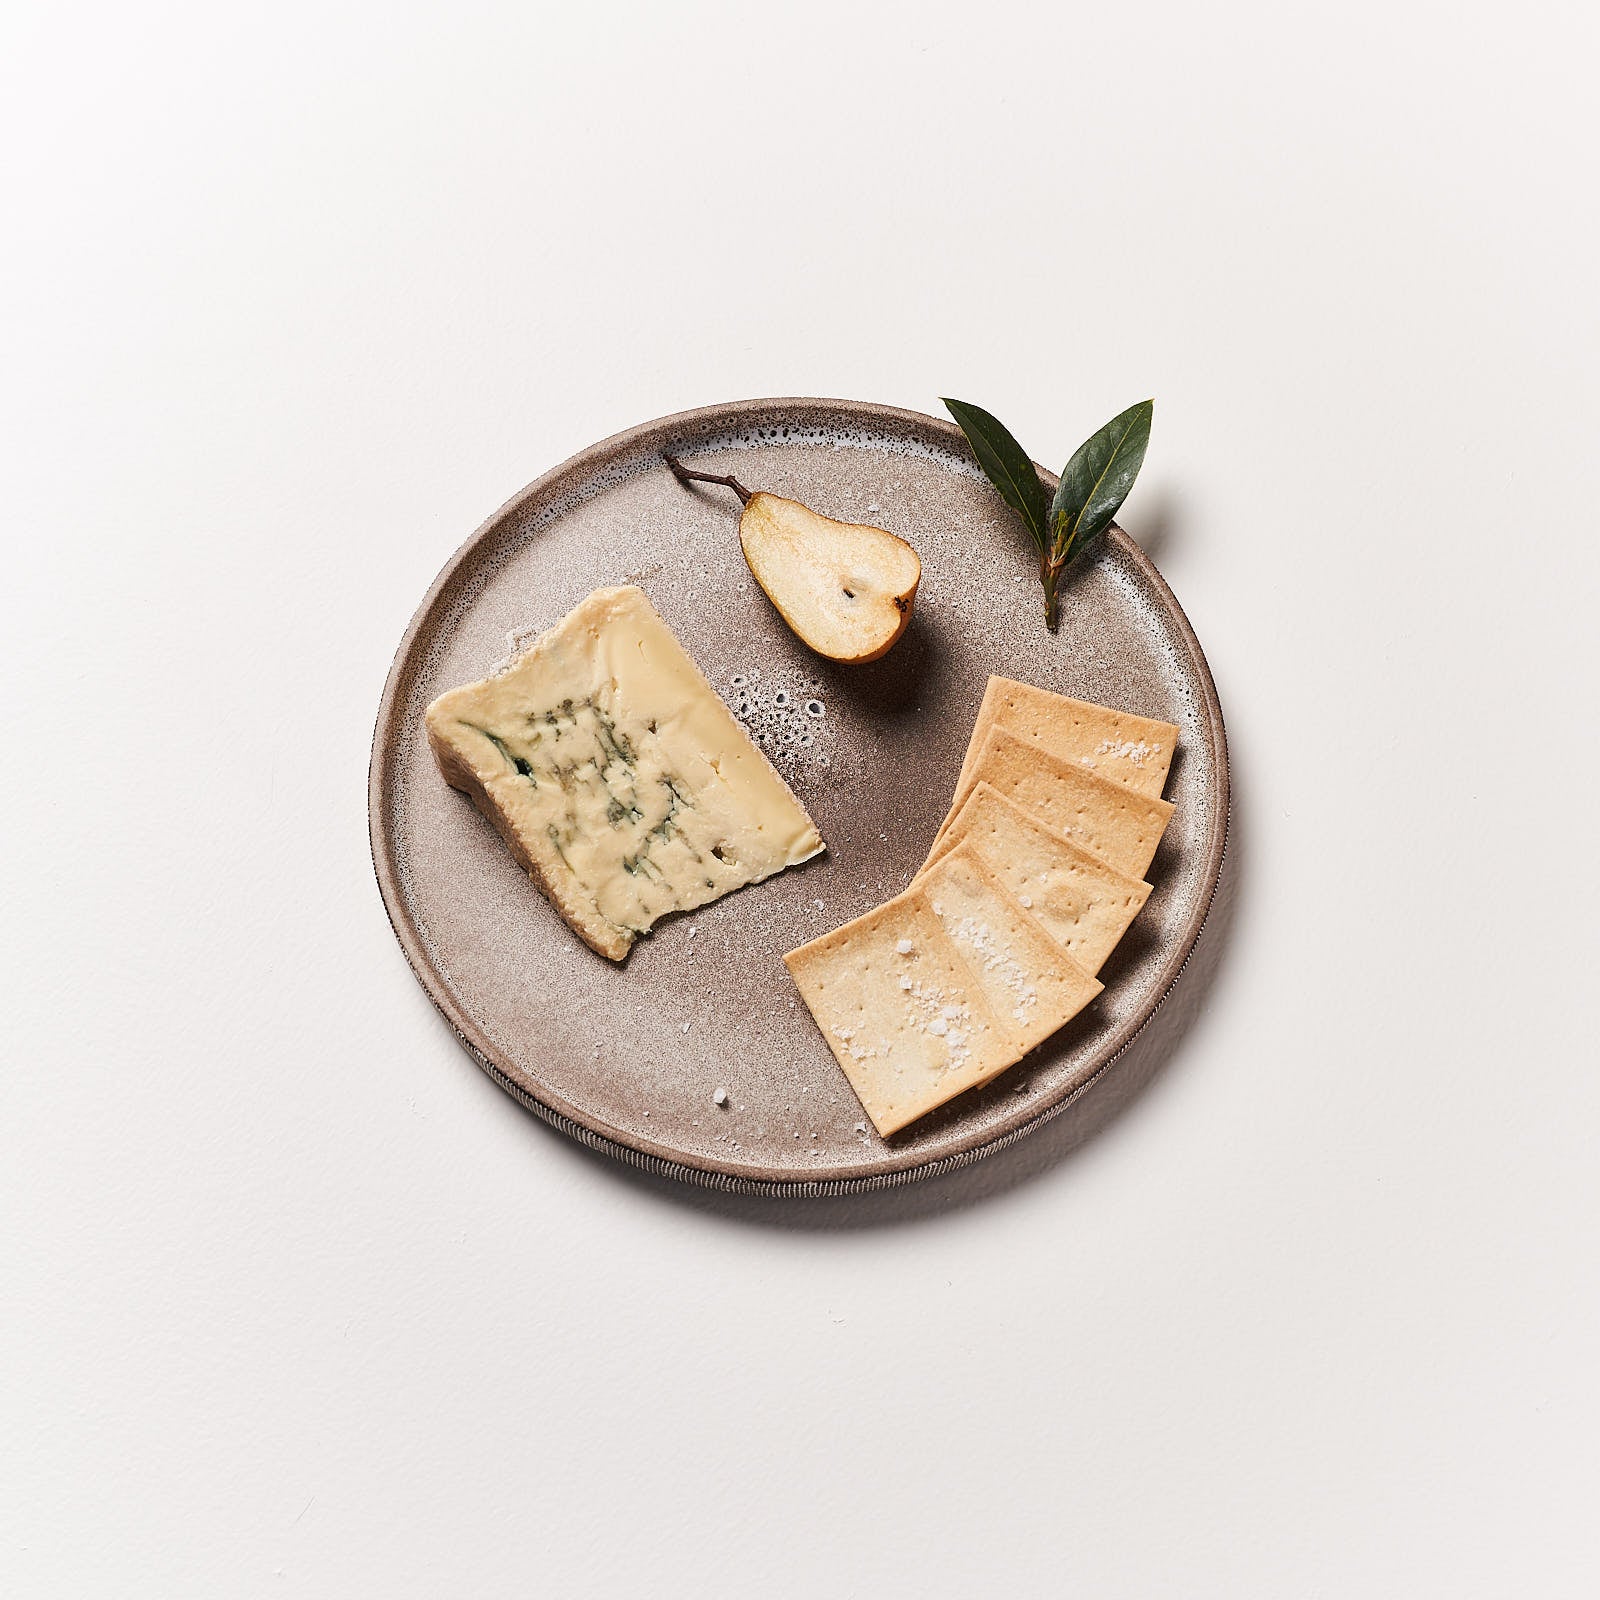 Berry's Creek Blue Cheese